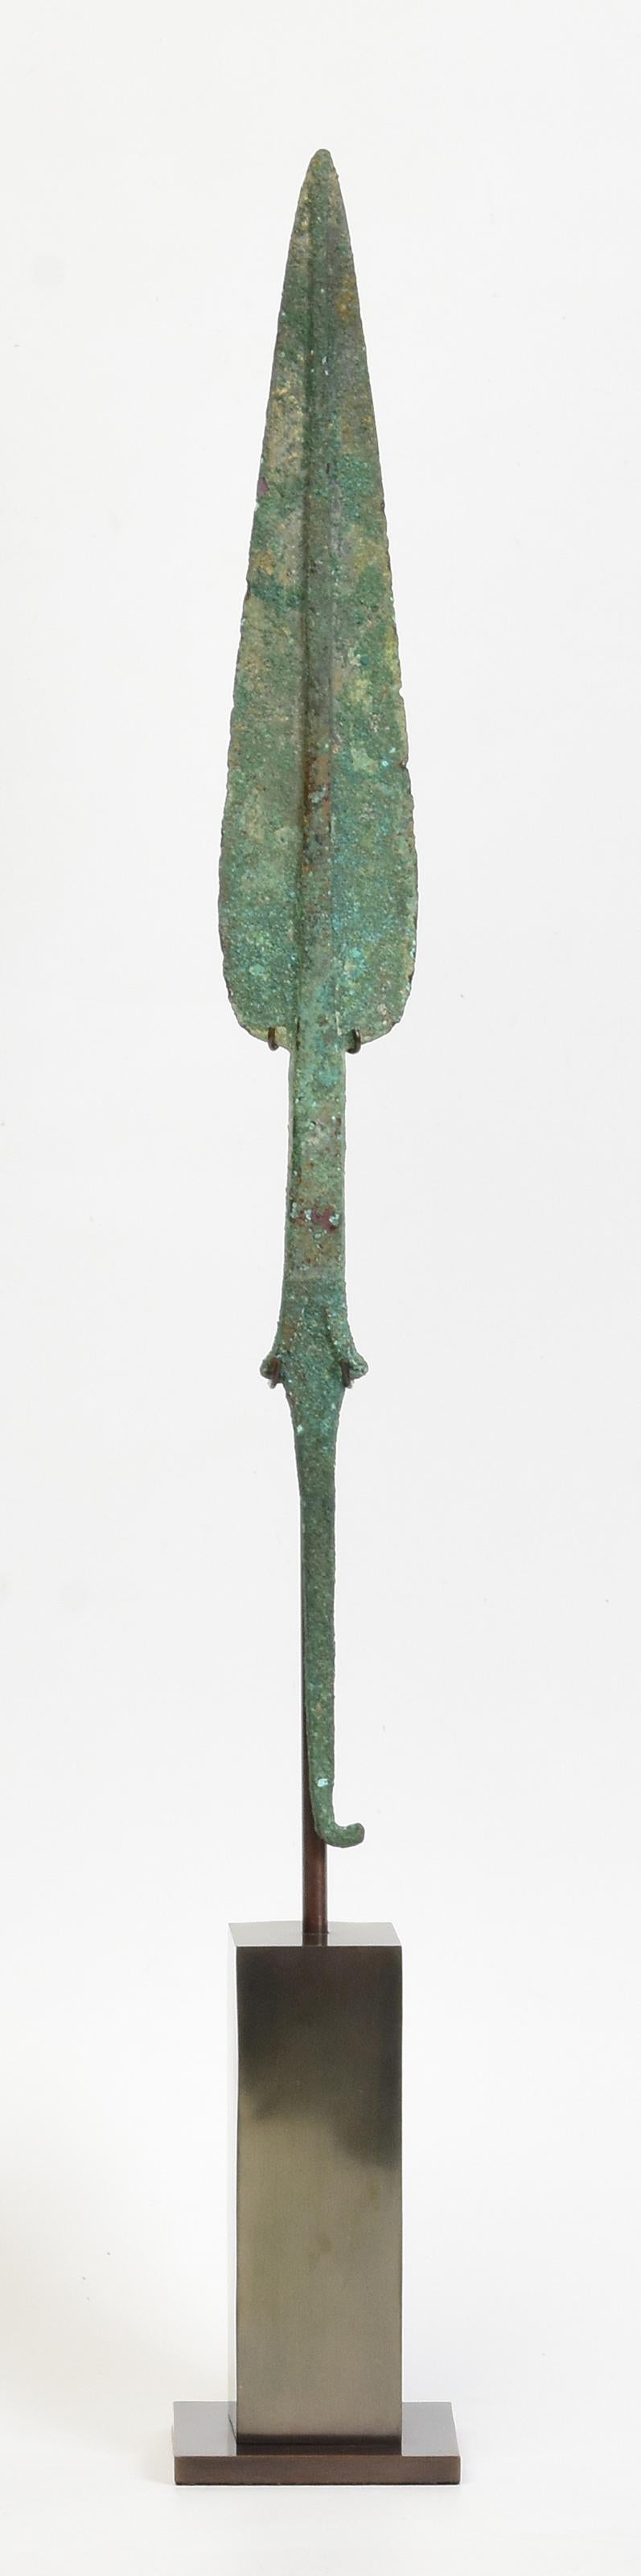 Ancient Antique Luristan Bronze Spear Early Iron Age Weapon For Sale 1